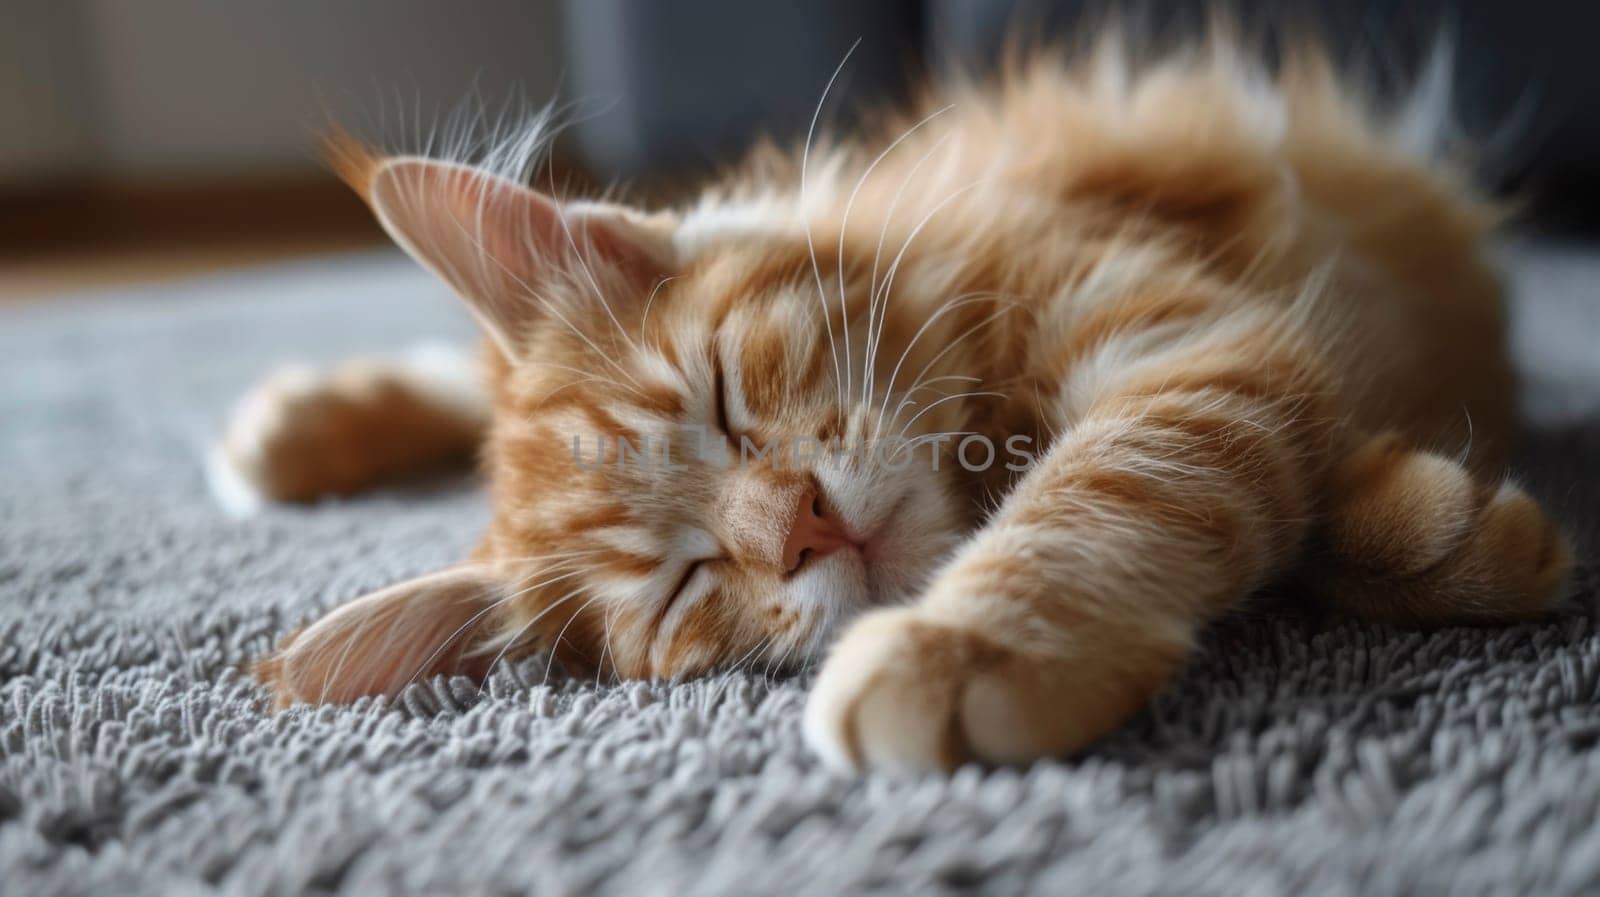 A cat sleeping on a carpet with its eyes closed